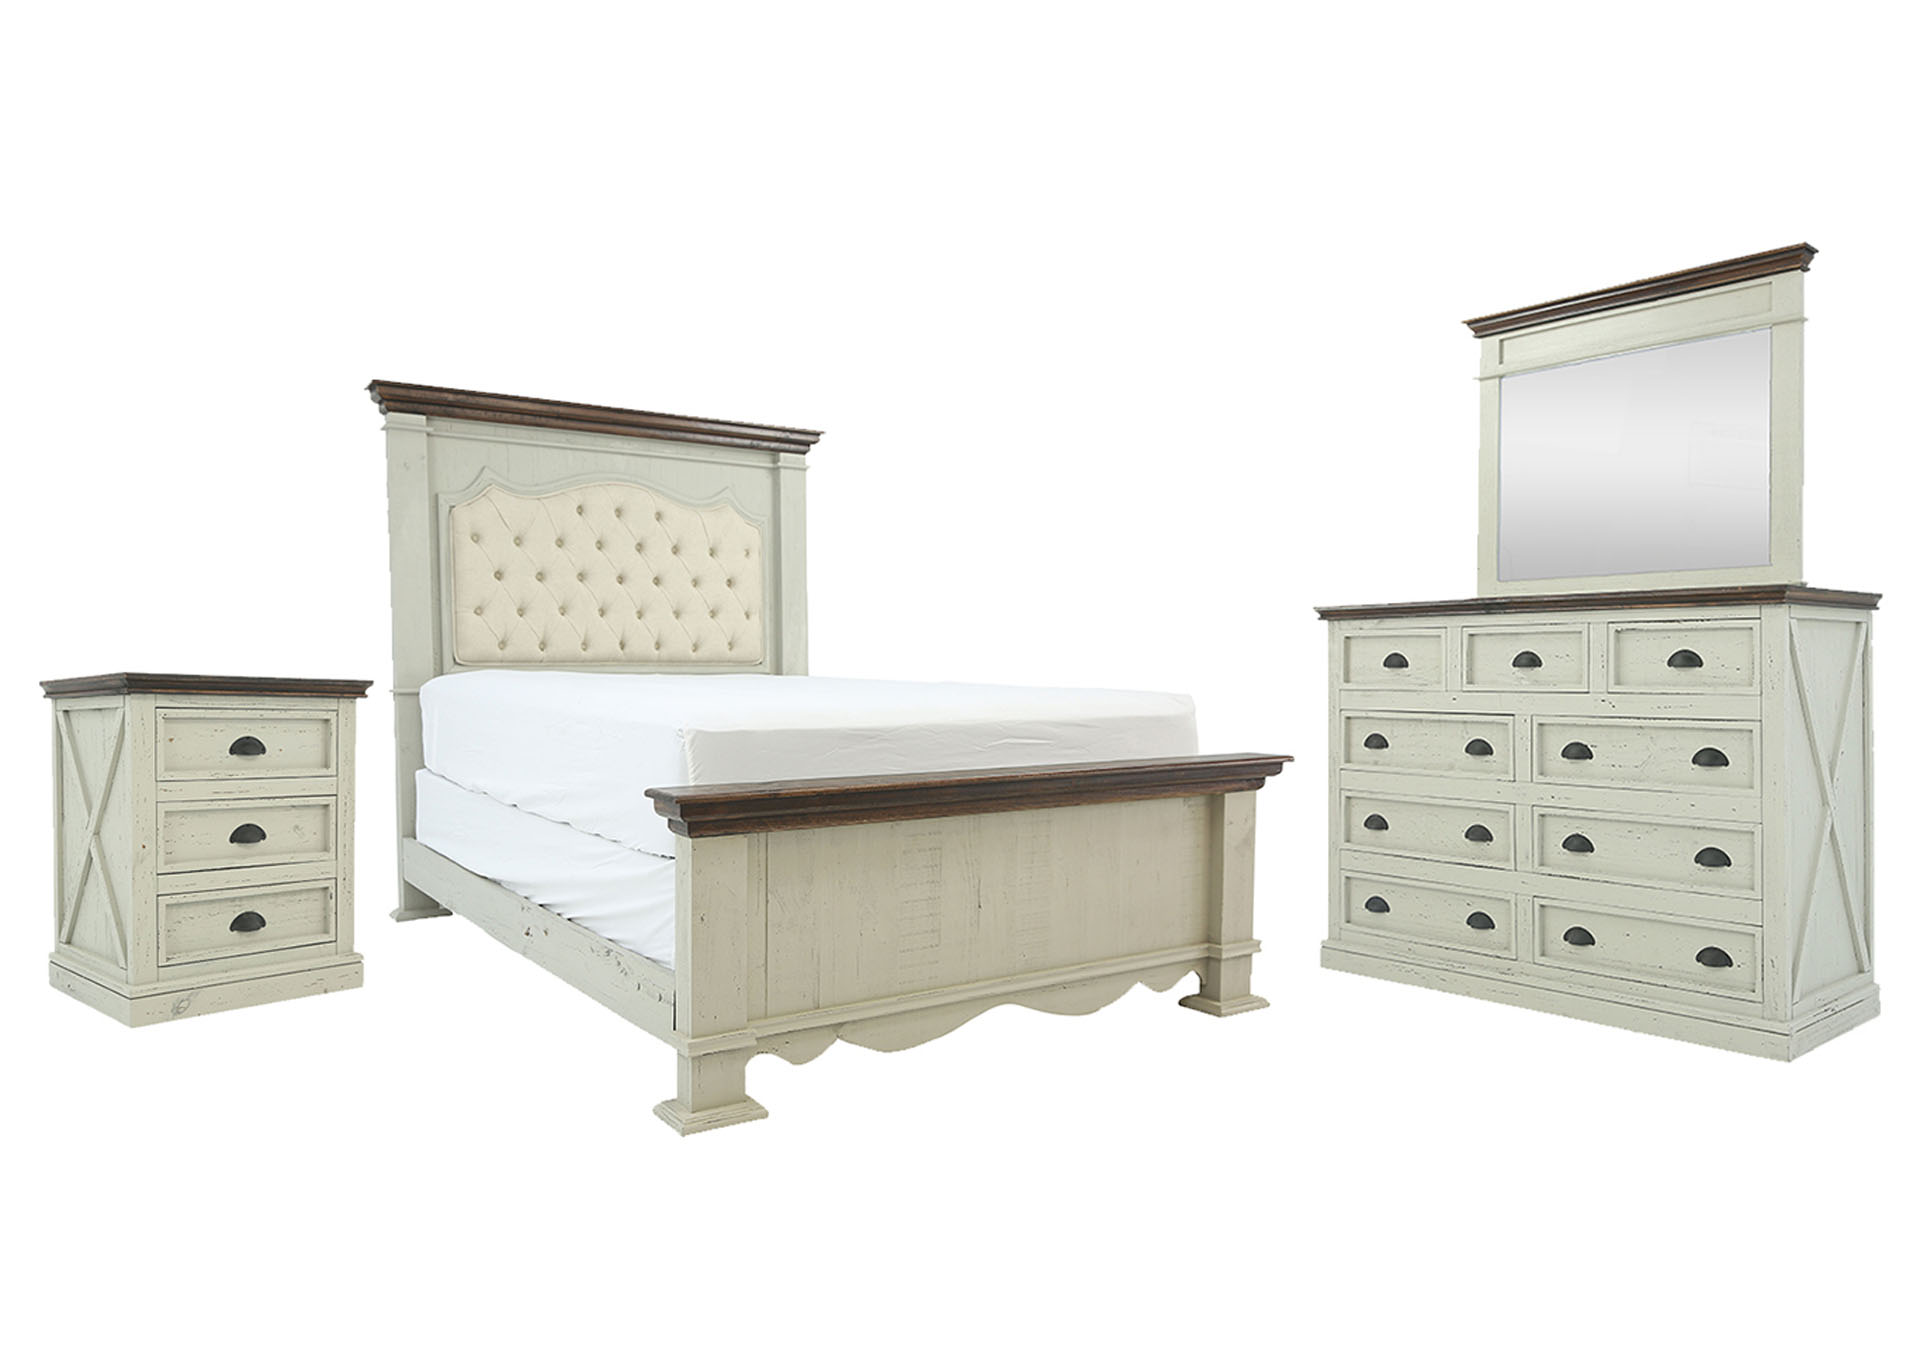 FIFTH AVENUE TWO TONE KING BEDROOM SET